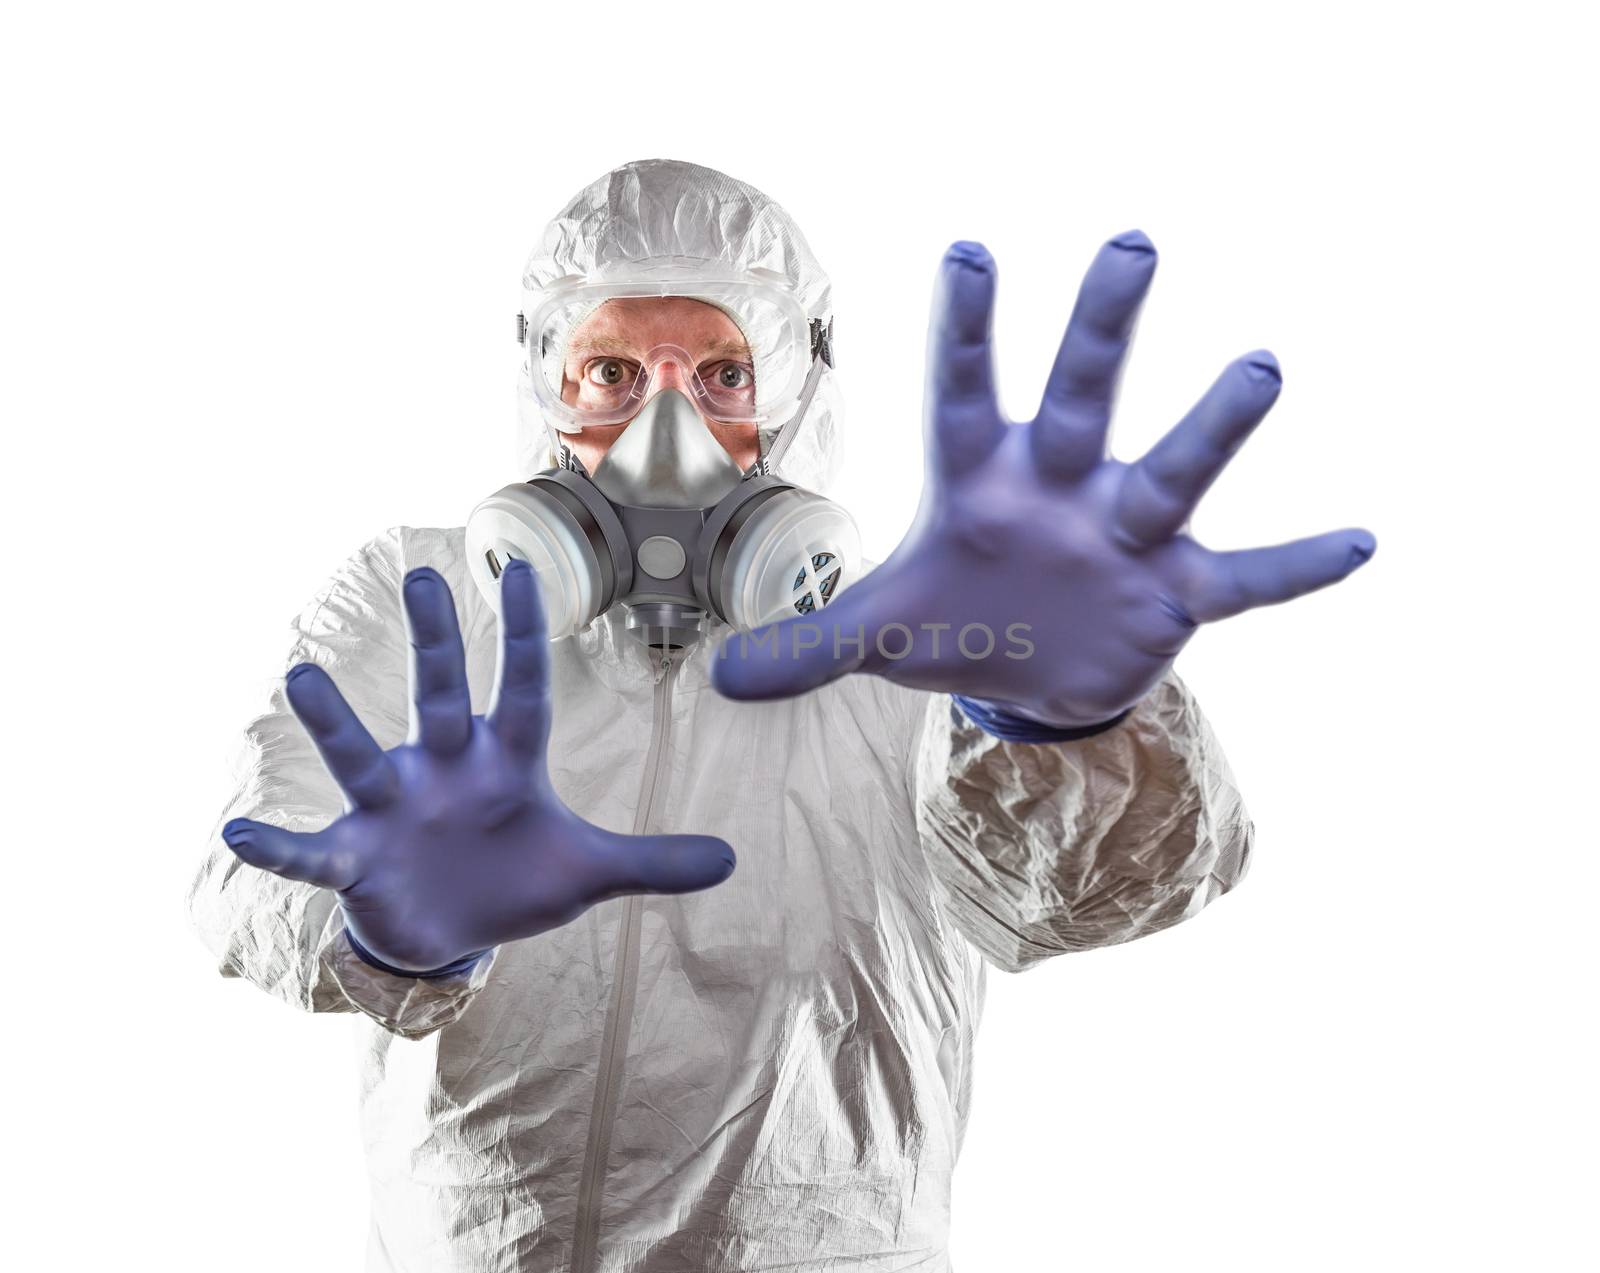 Man Wearing Hazmat Suit Reaching Out With Hands Isolated On White by Feverpitched